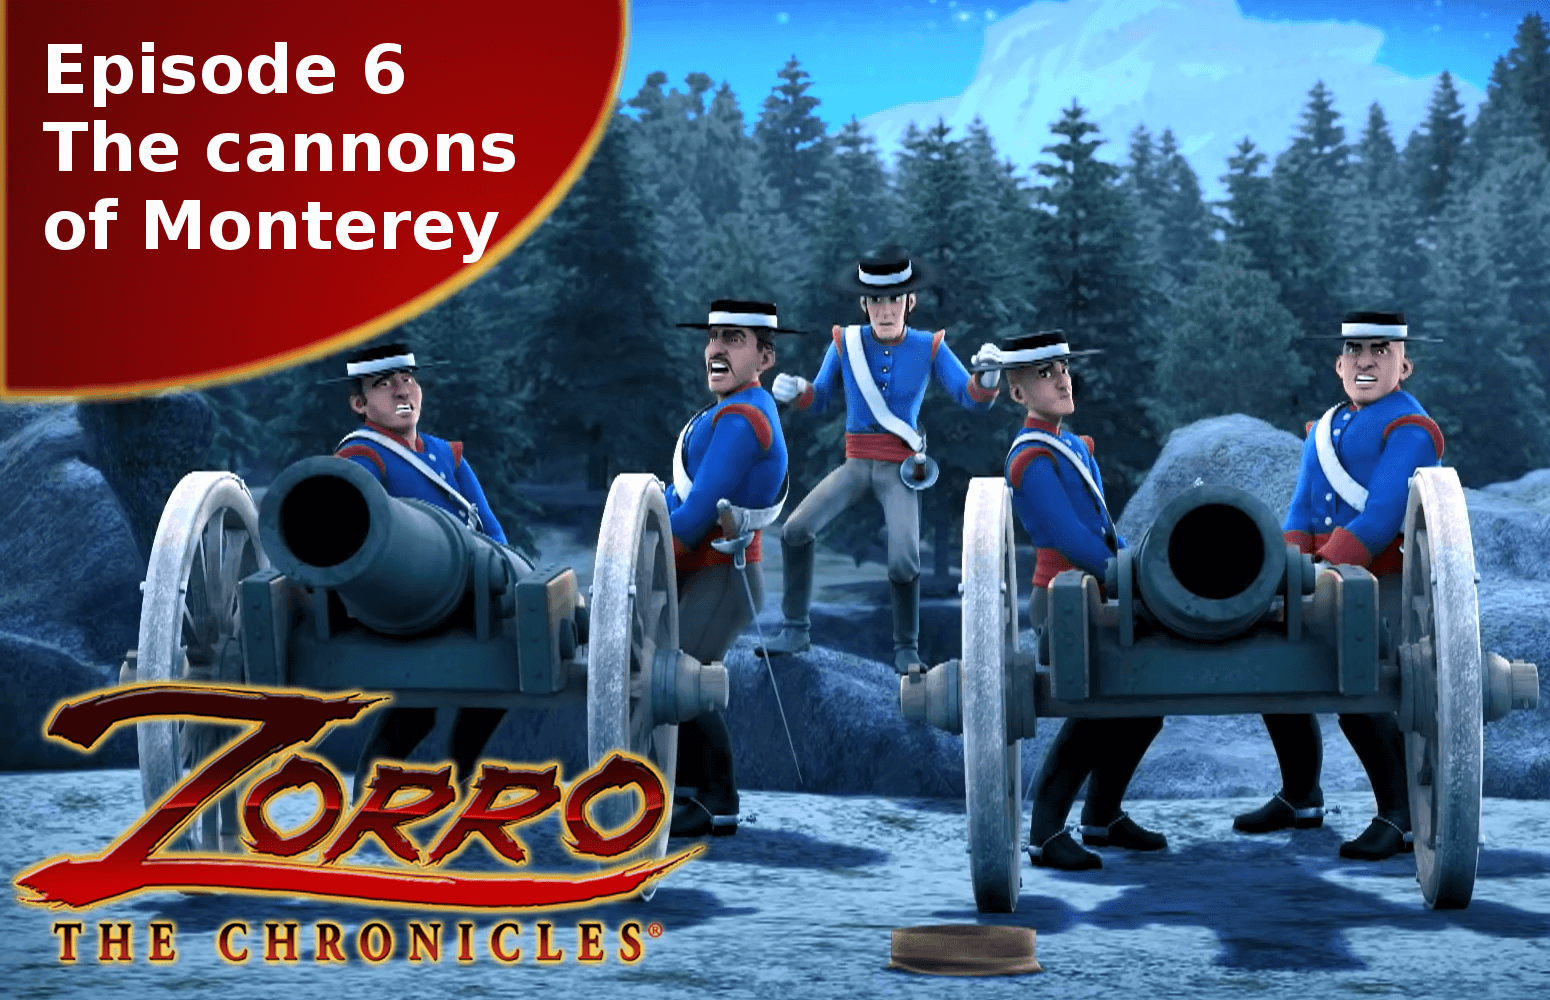 Zorro the Chronicles episode 6 The cannons of Monterey